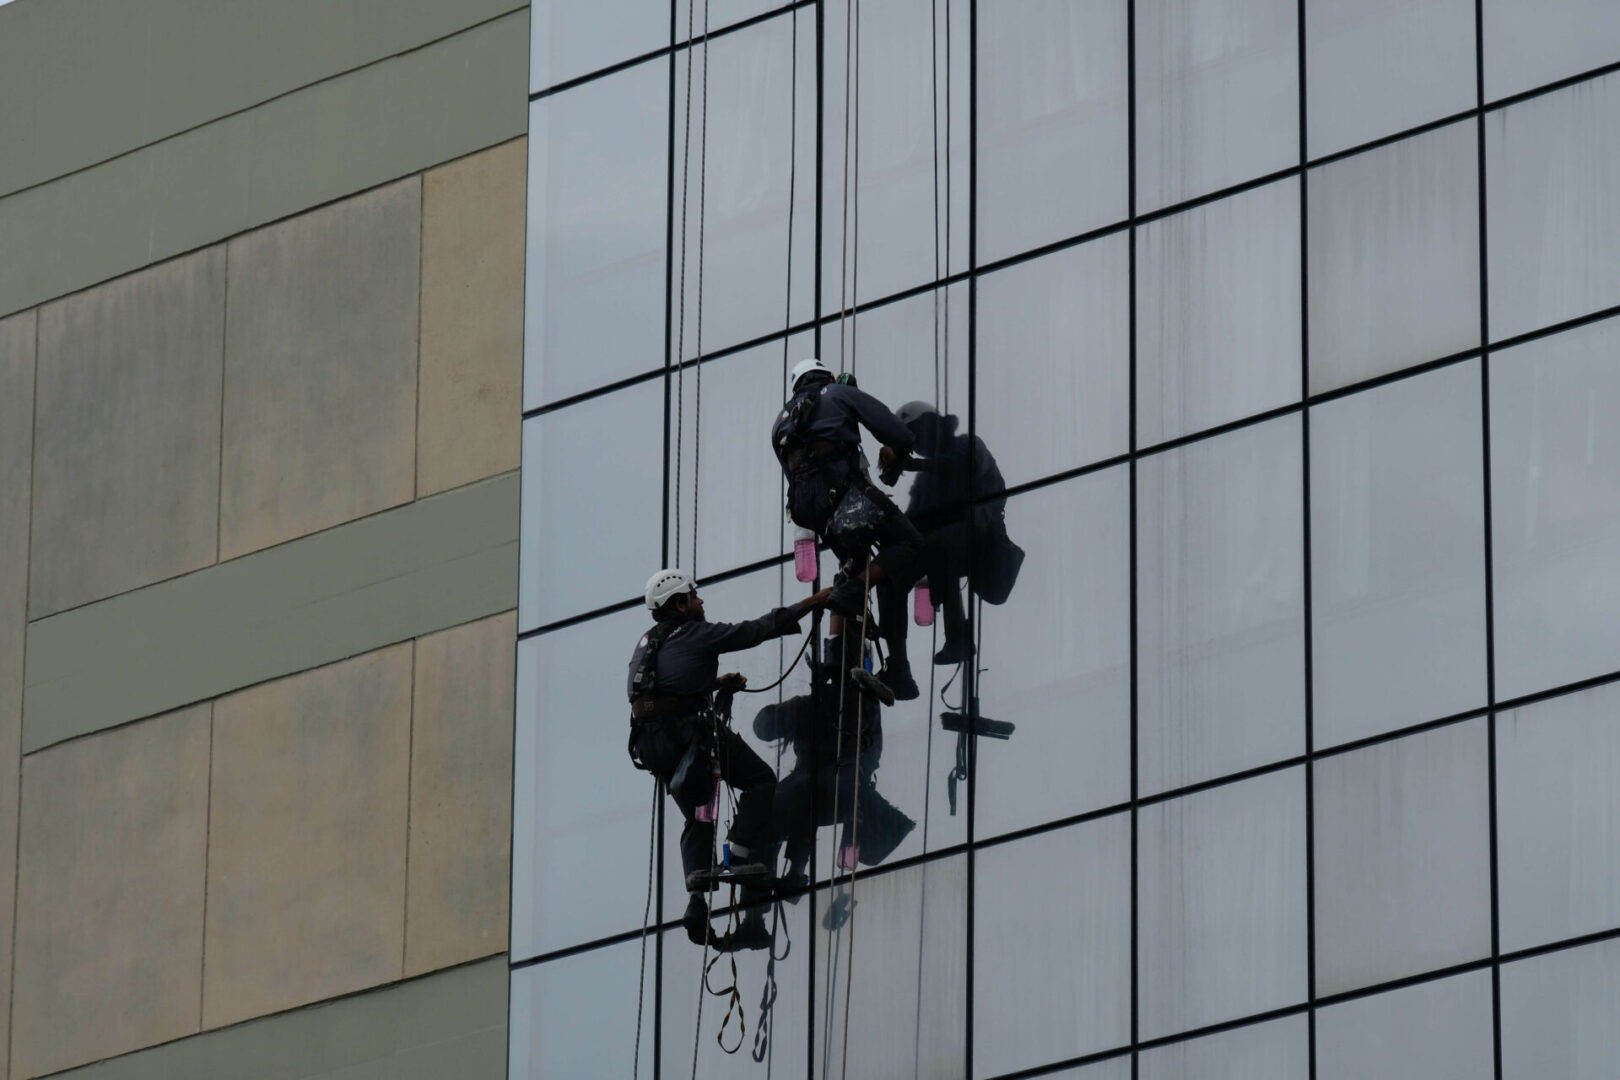 A group of people hanging on ropes from a building.